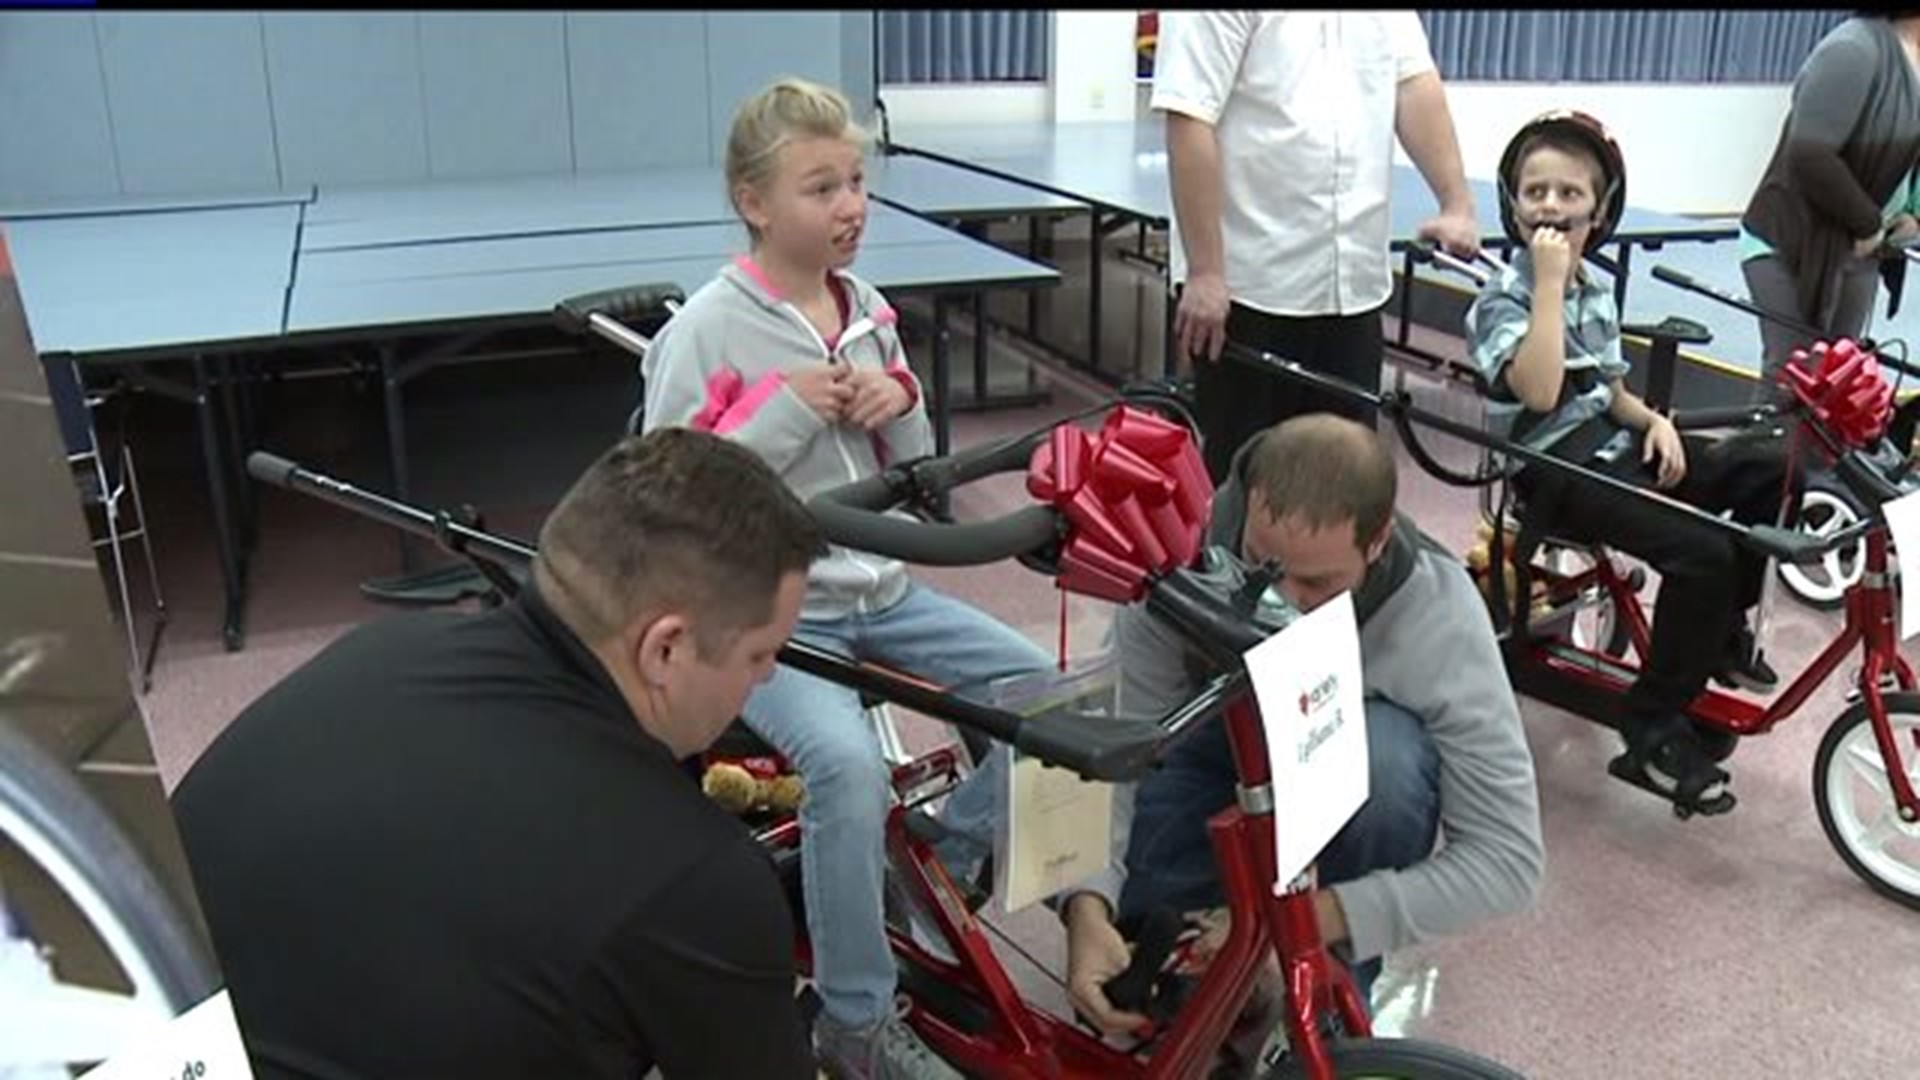 Kids receive custom-made bikes from charity, ride for the first time